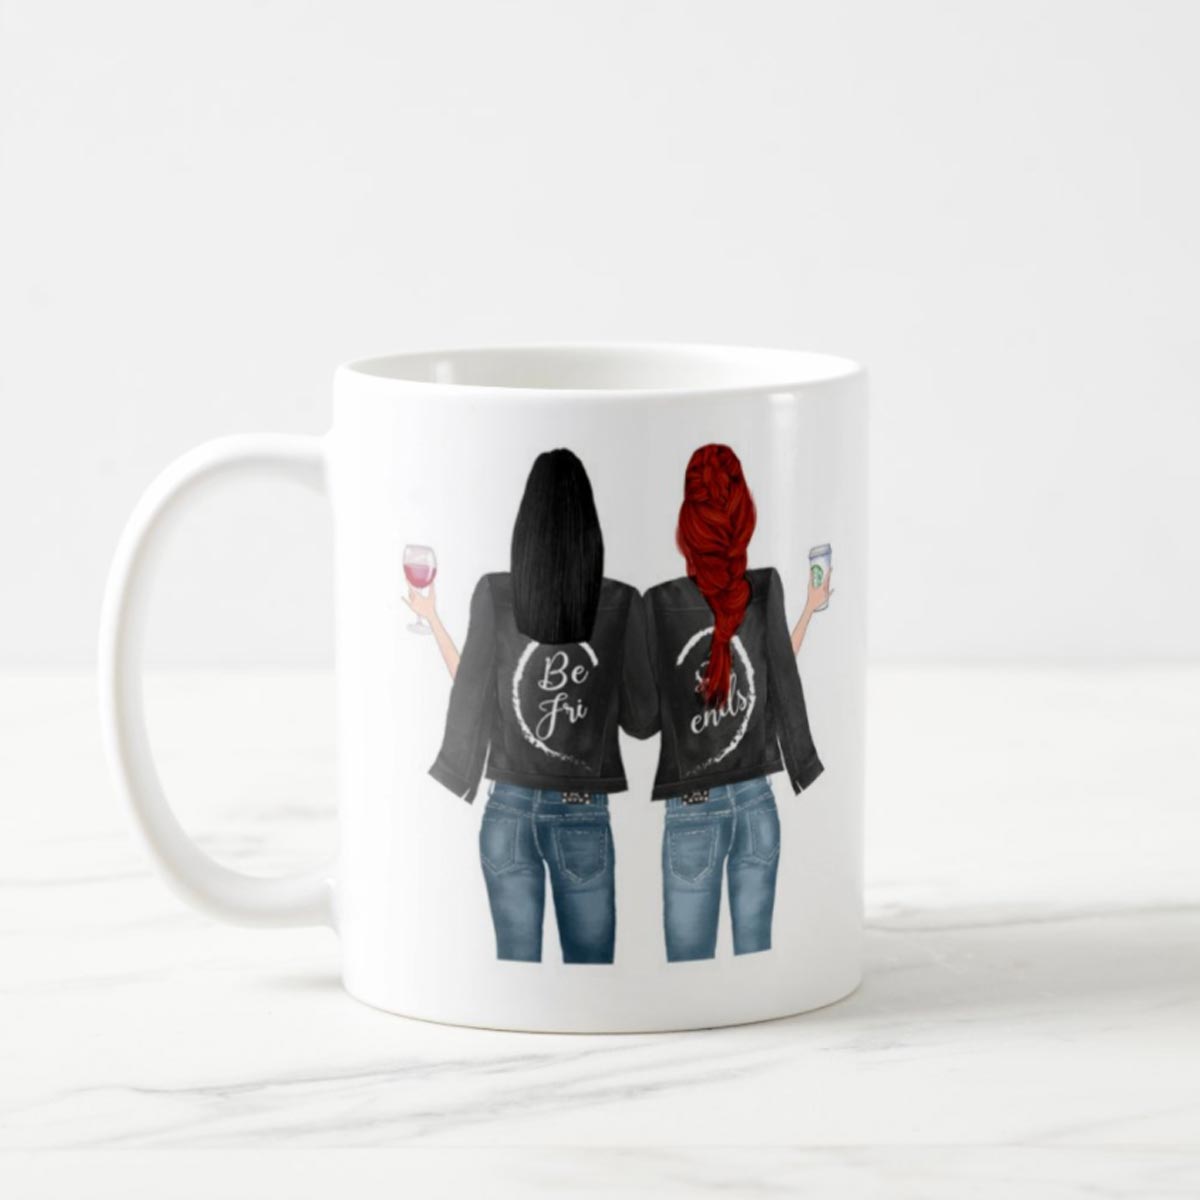 My Best Friend May not be my Sister by Blood but She is my Sister by Heart Coffee Mug